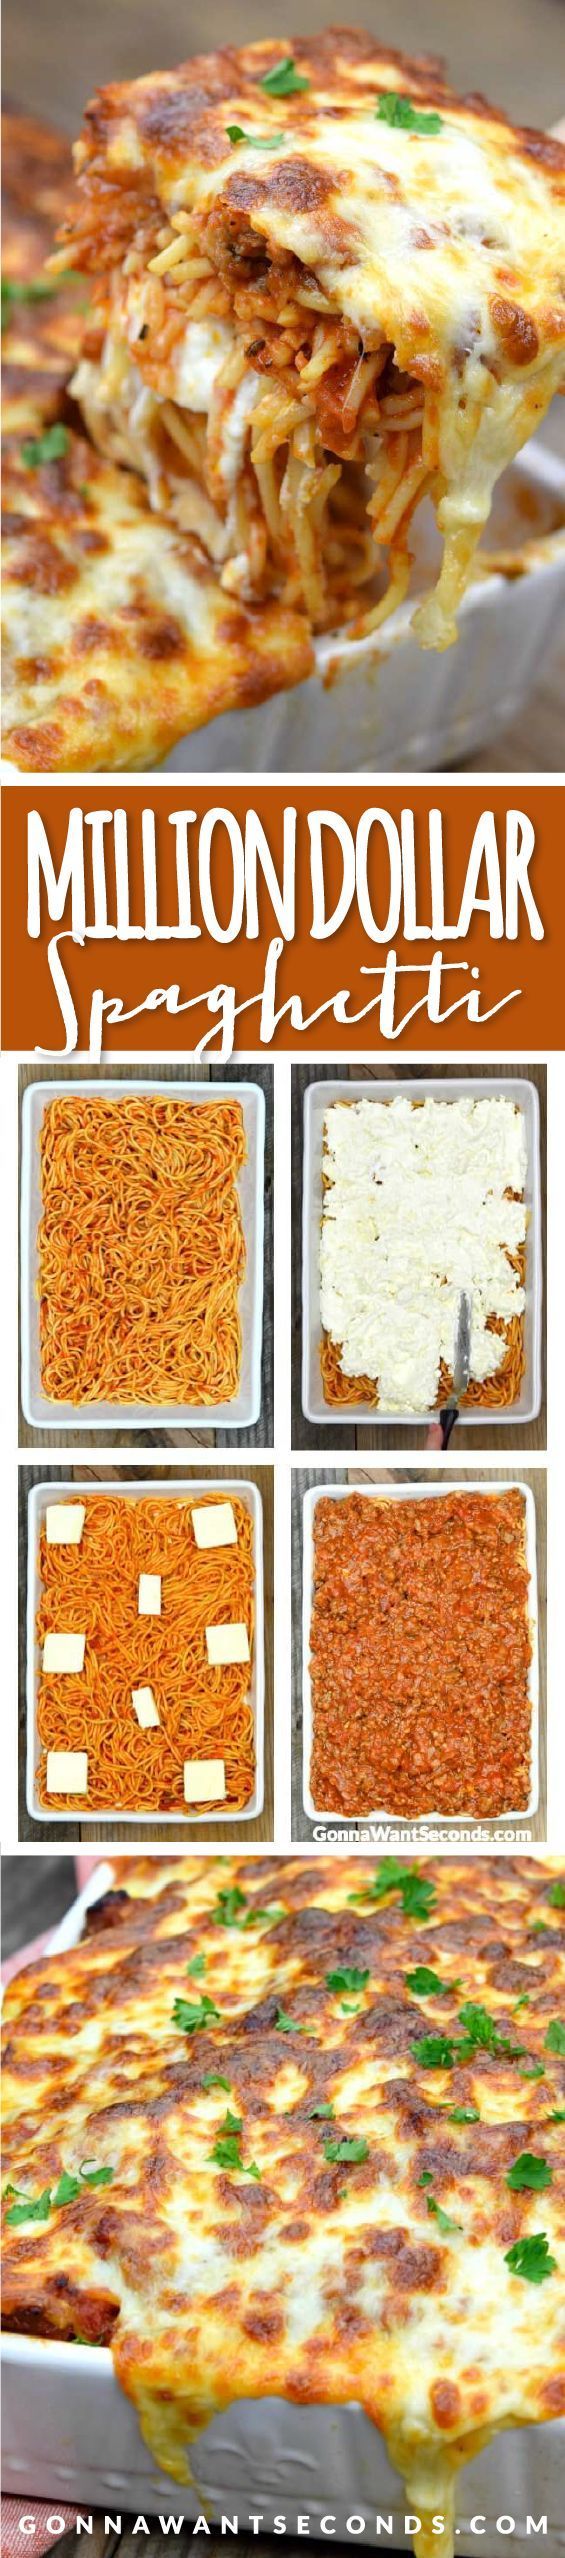 This Million Dollar Spaghetti Casserole has a layer of creamy, gooey cheese.Super easy to put together! To DIE for delish!